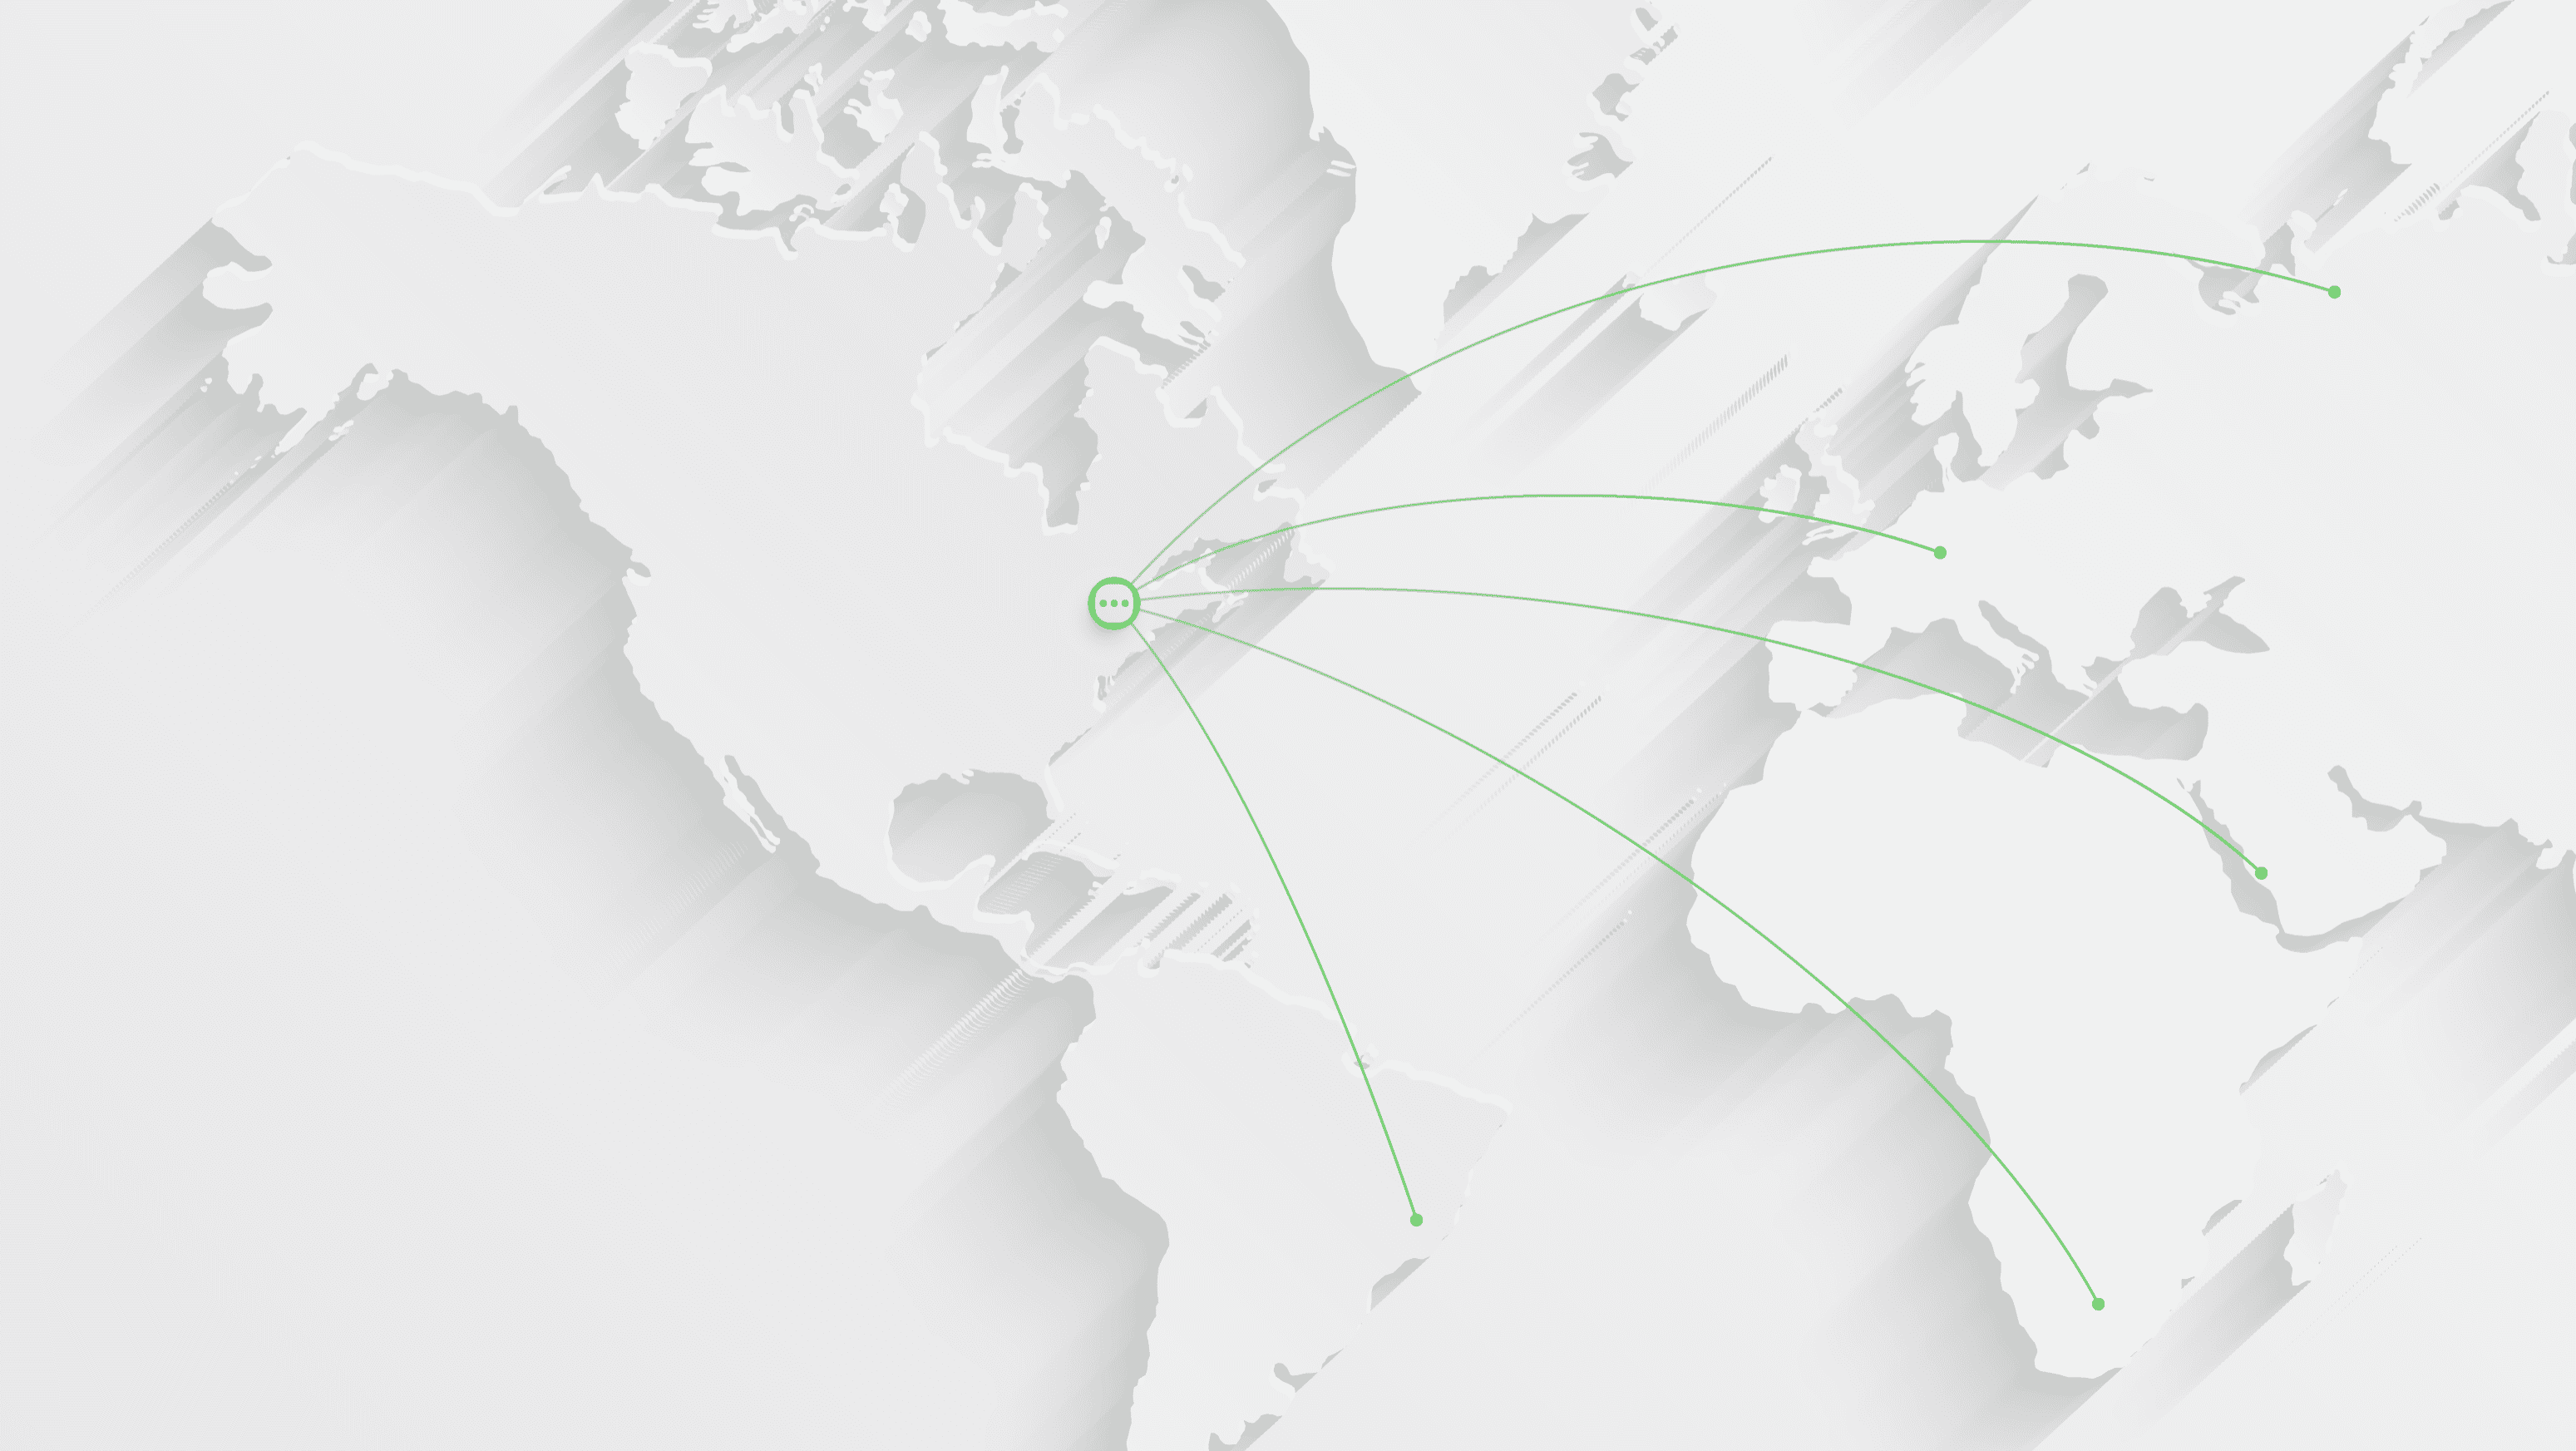 World map, grey in colour. Green else labs logo located where Ottawa, ON, Canada is located with multiple green lines, starting at the else logo and connecting to other major cities across the world!